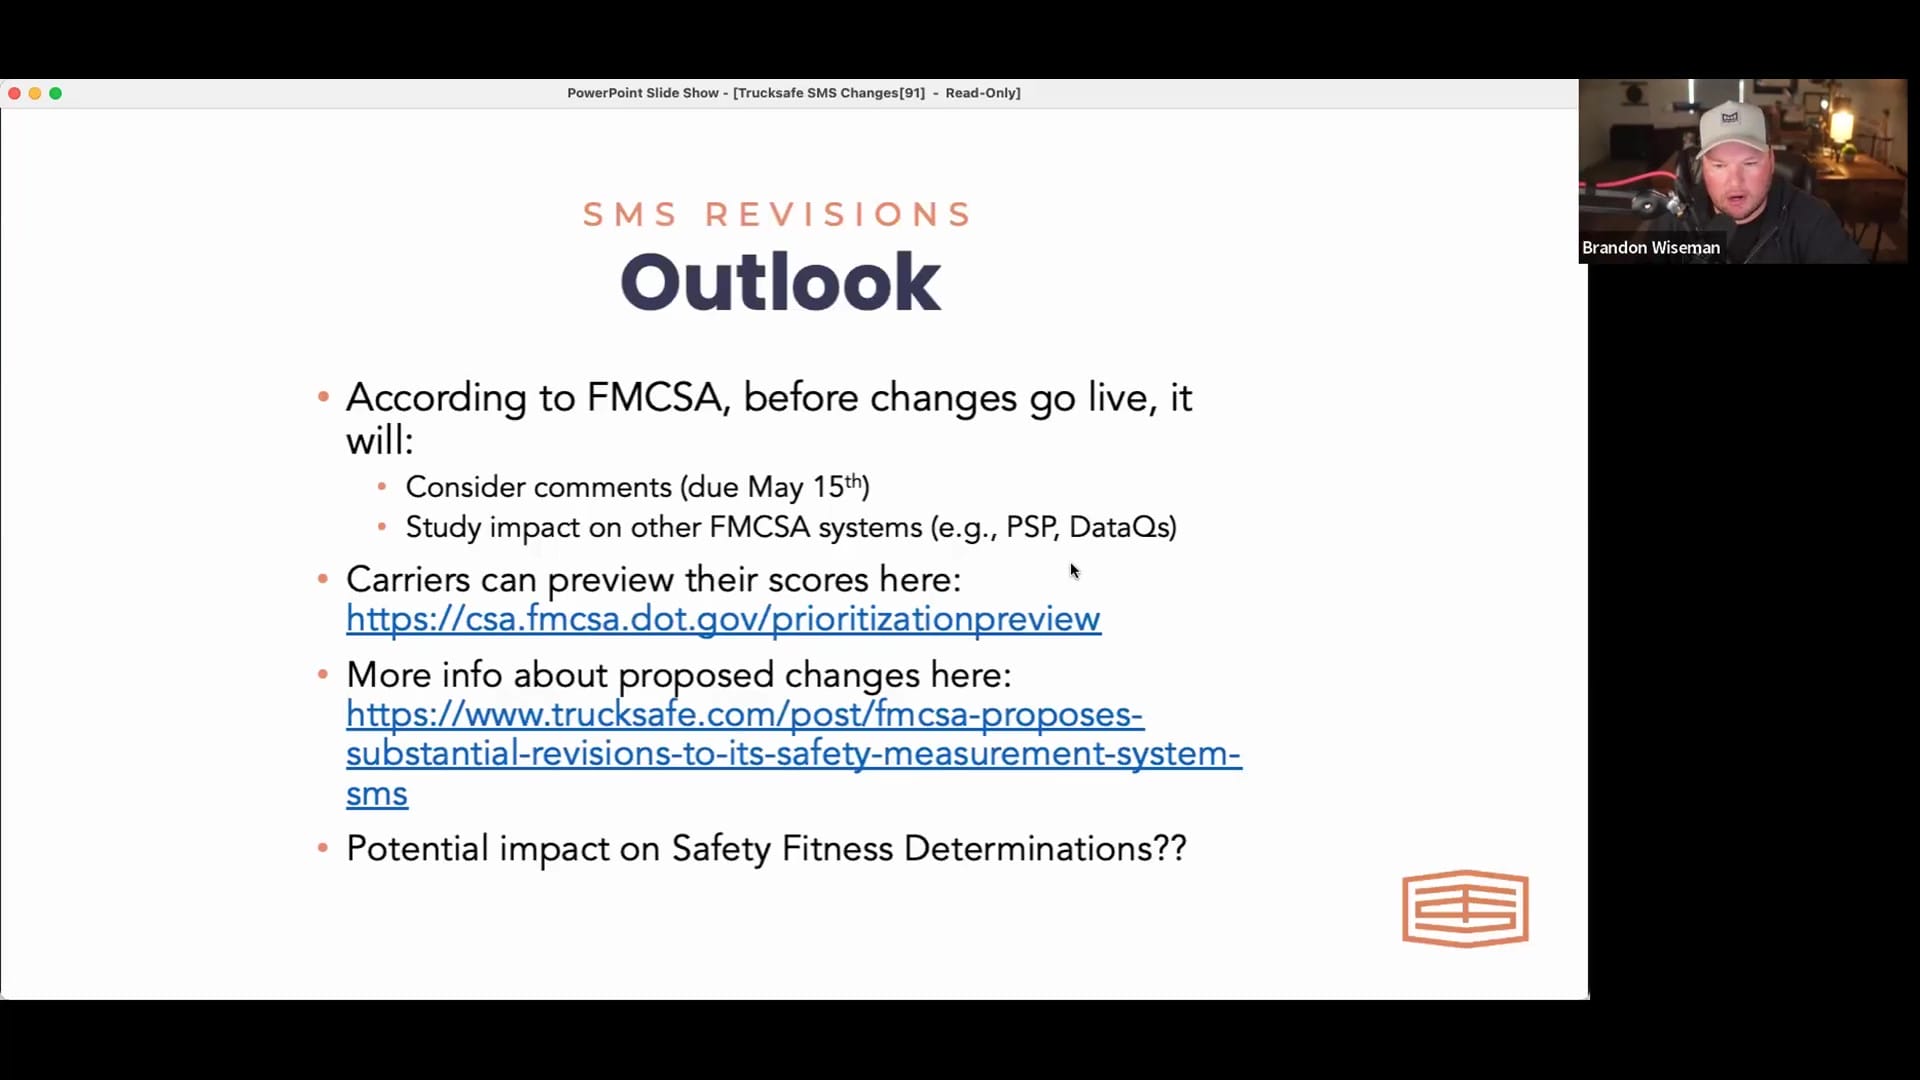 SMS Revisions FMCSA Outlook